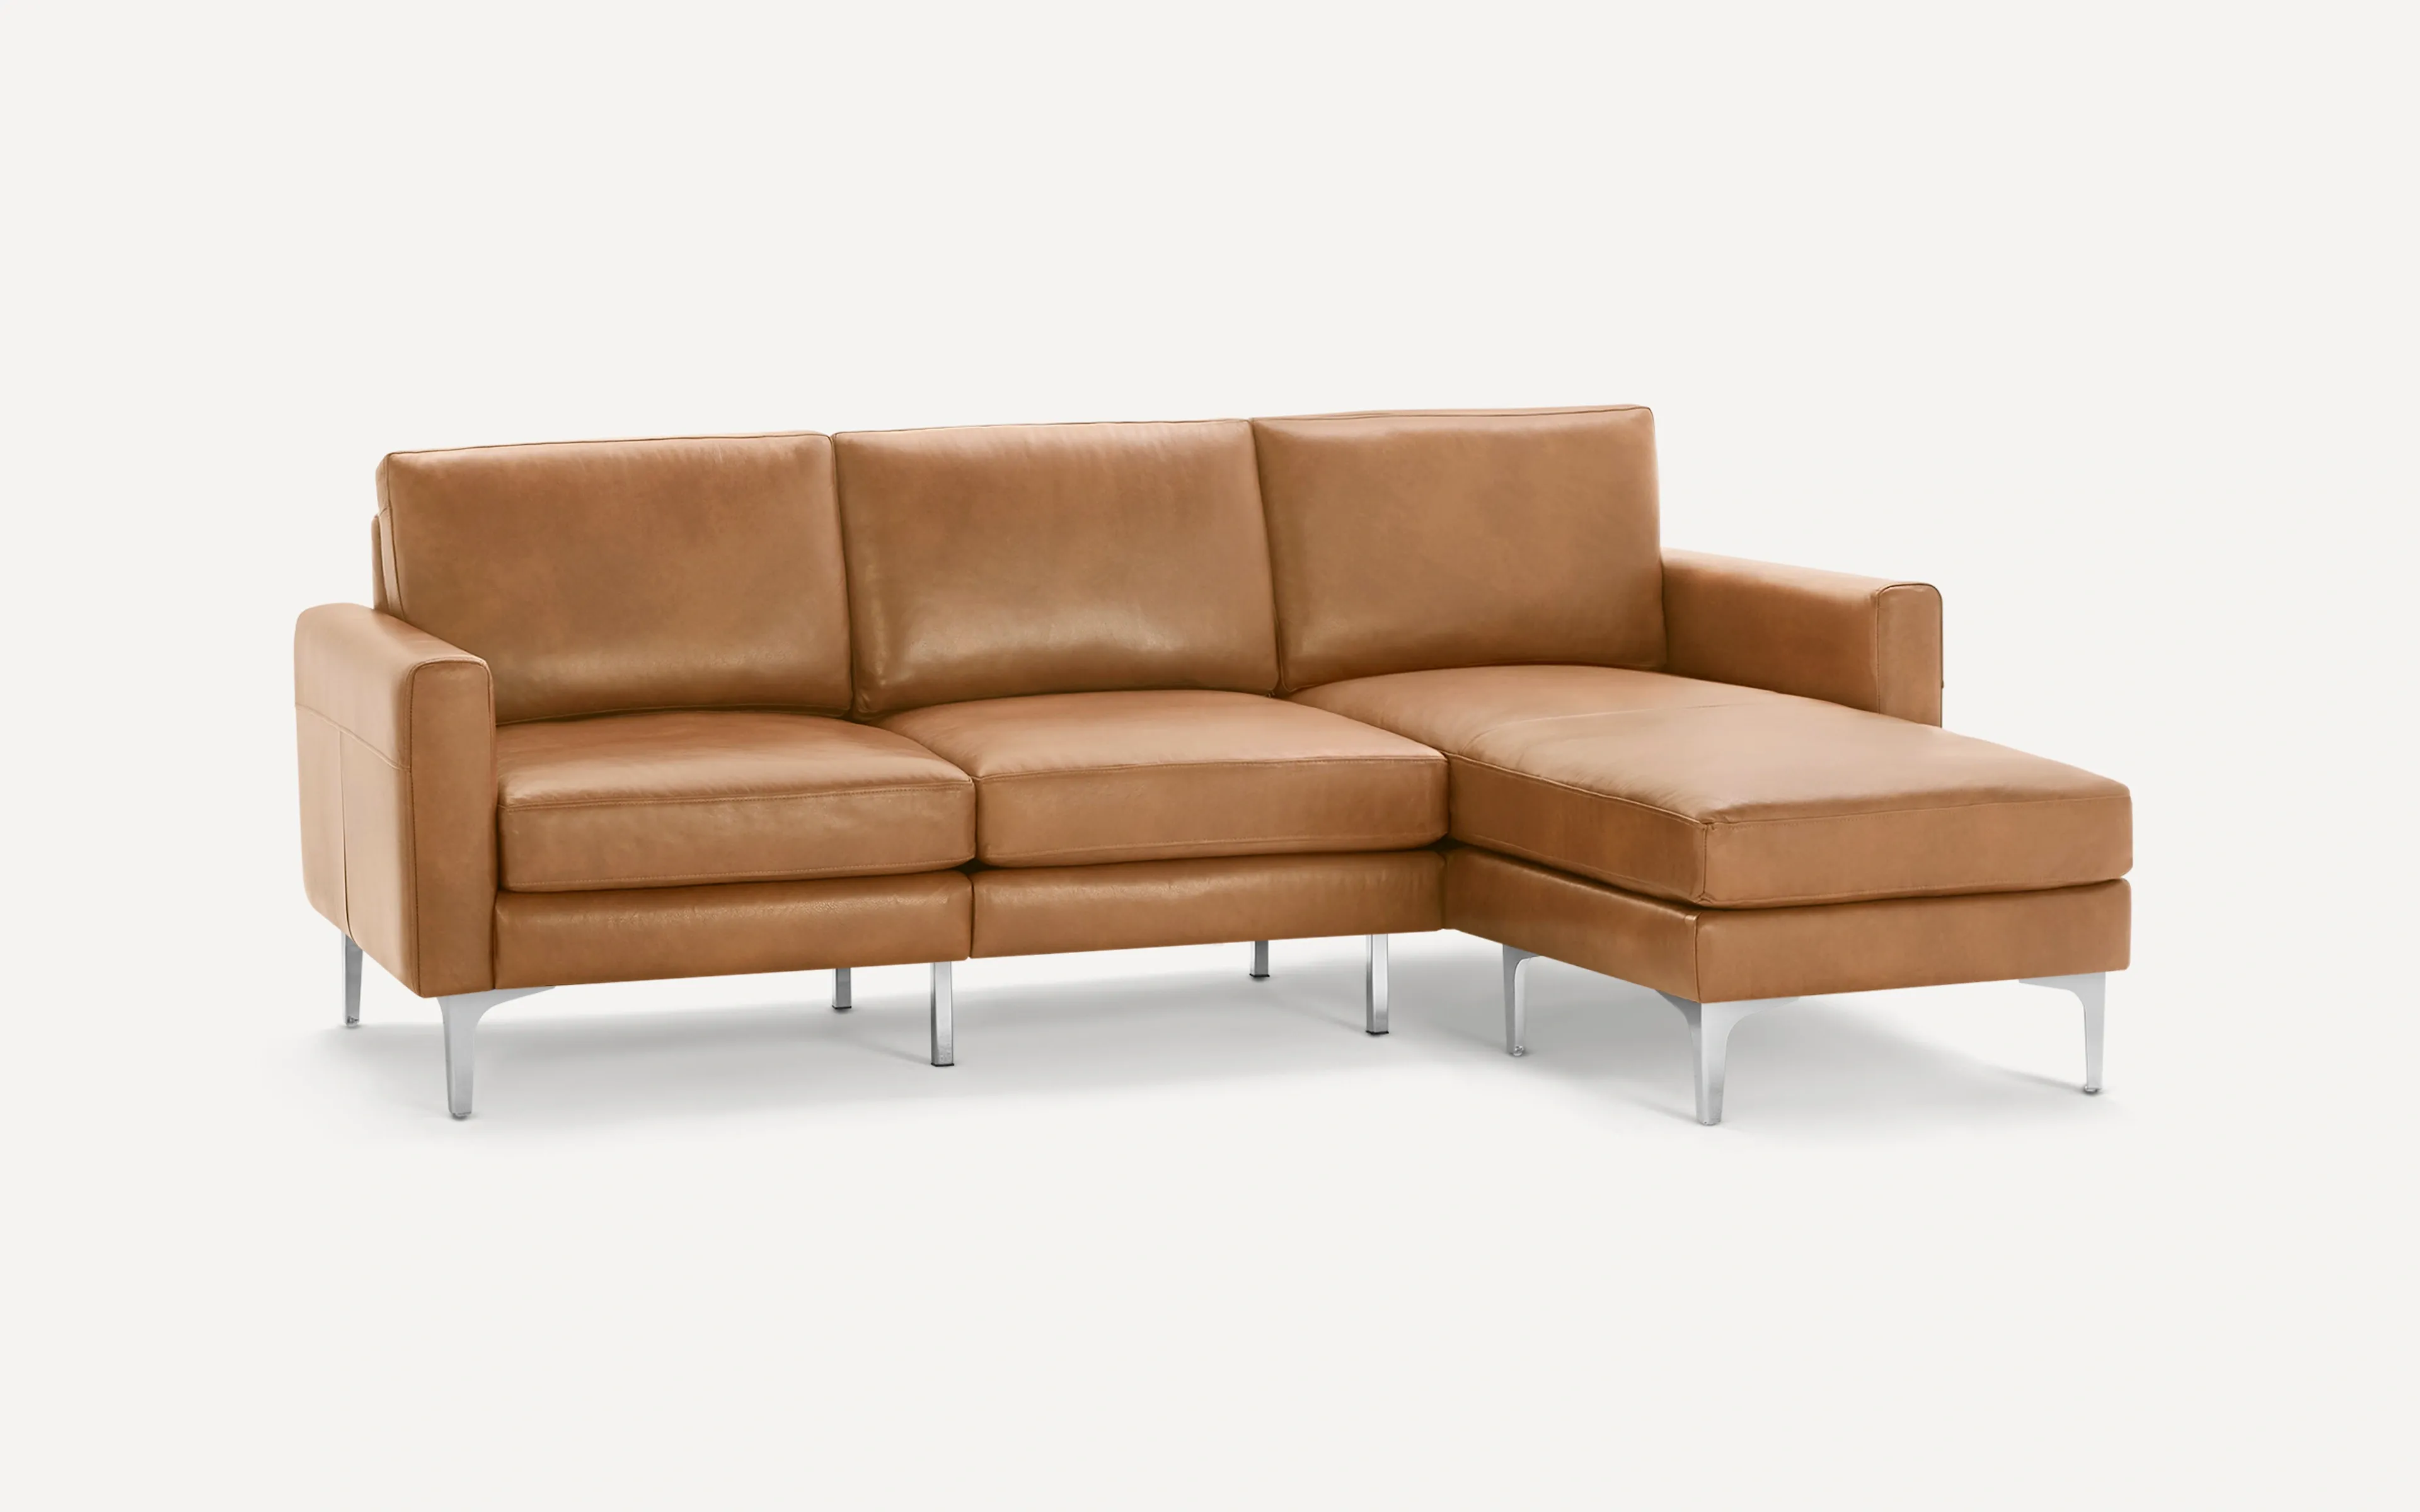 Original Nomad Chaise Sofa in Camel Leather